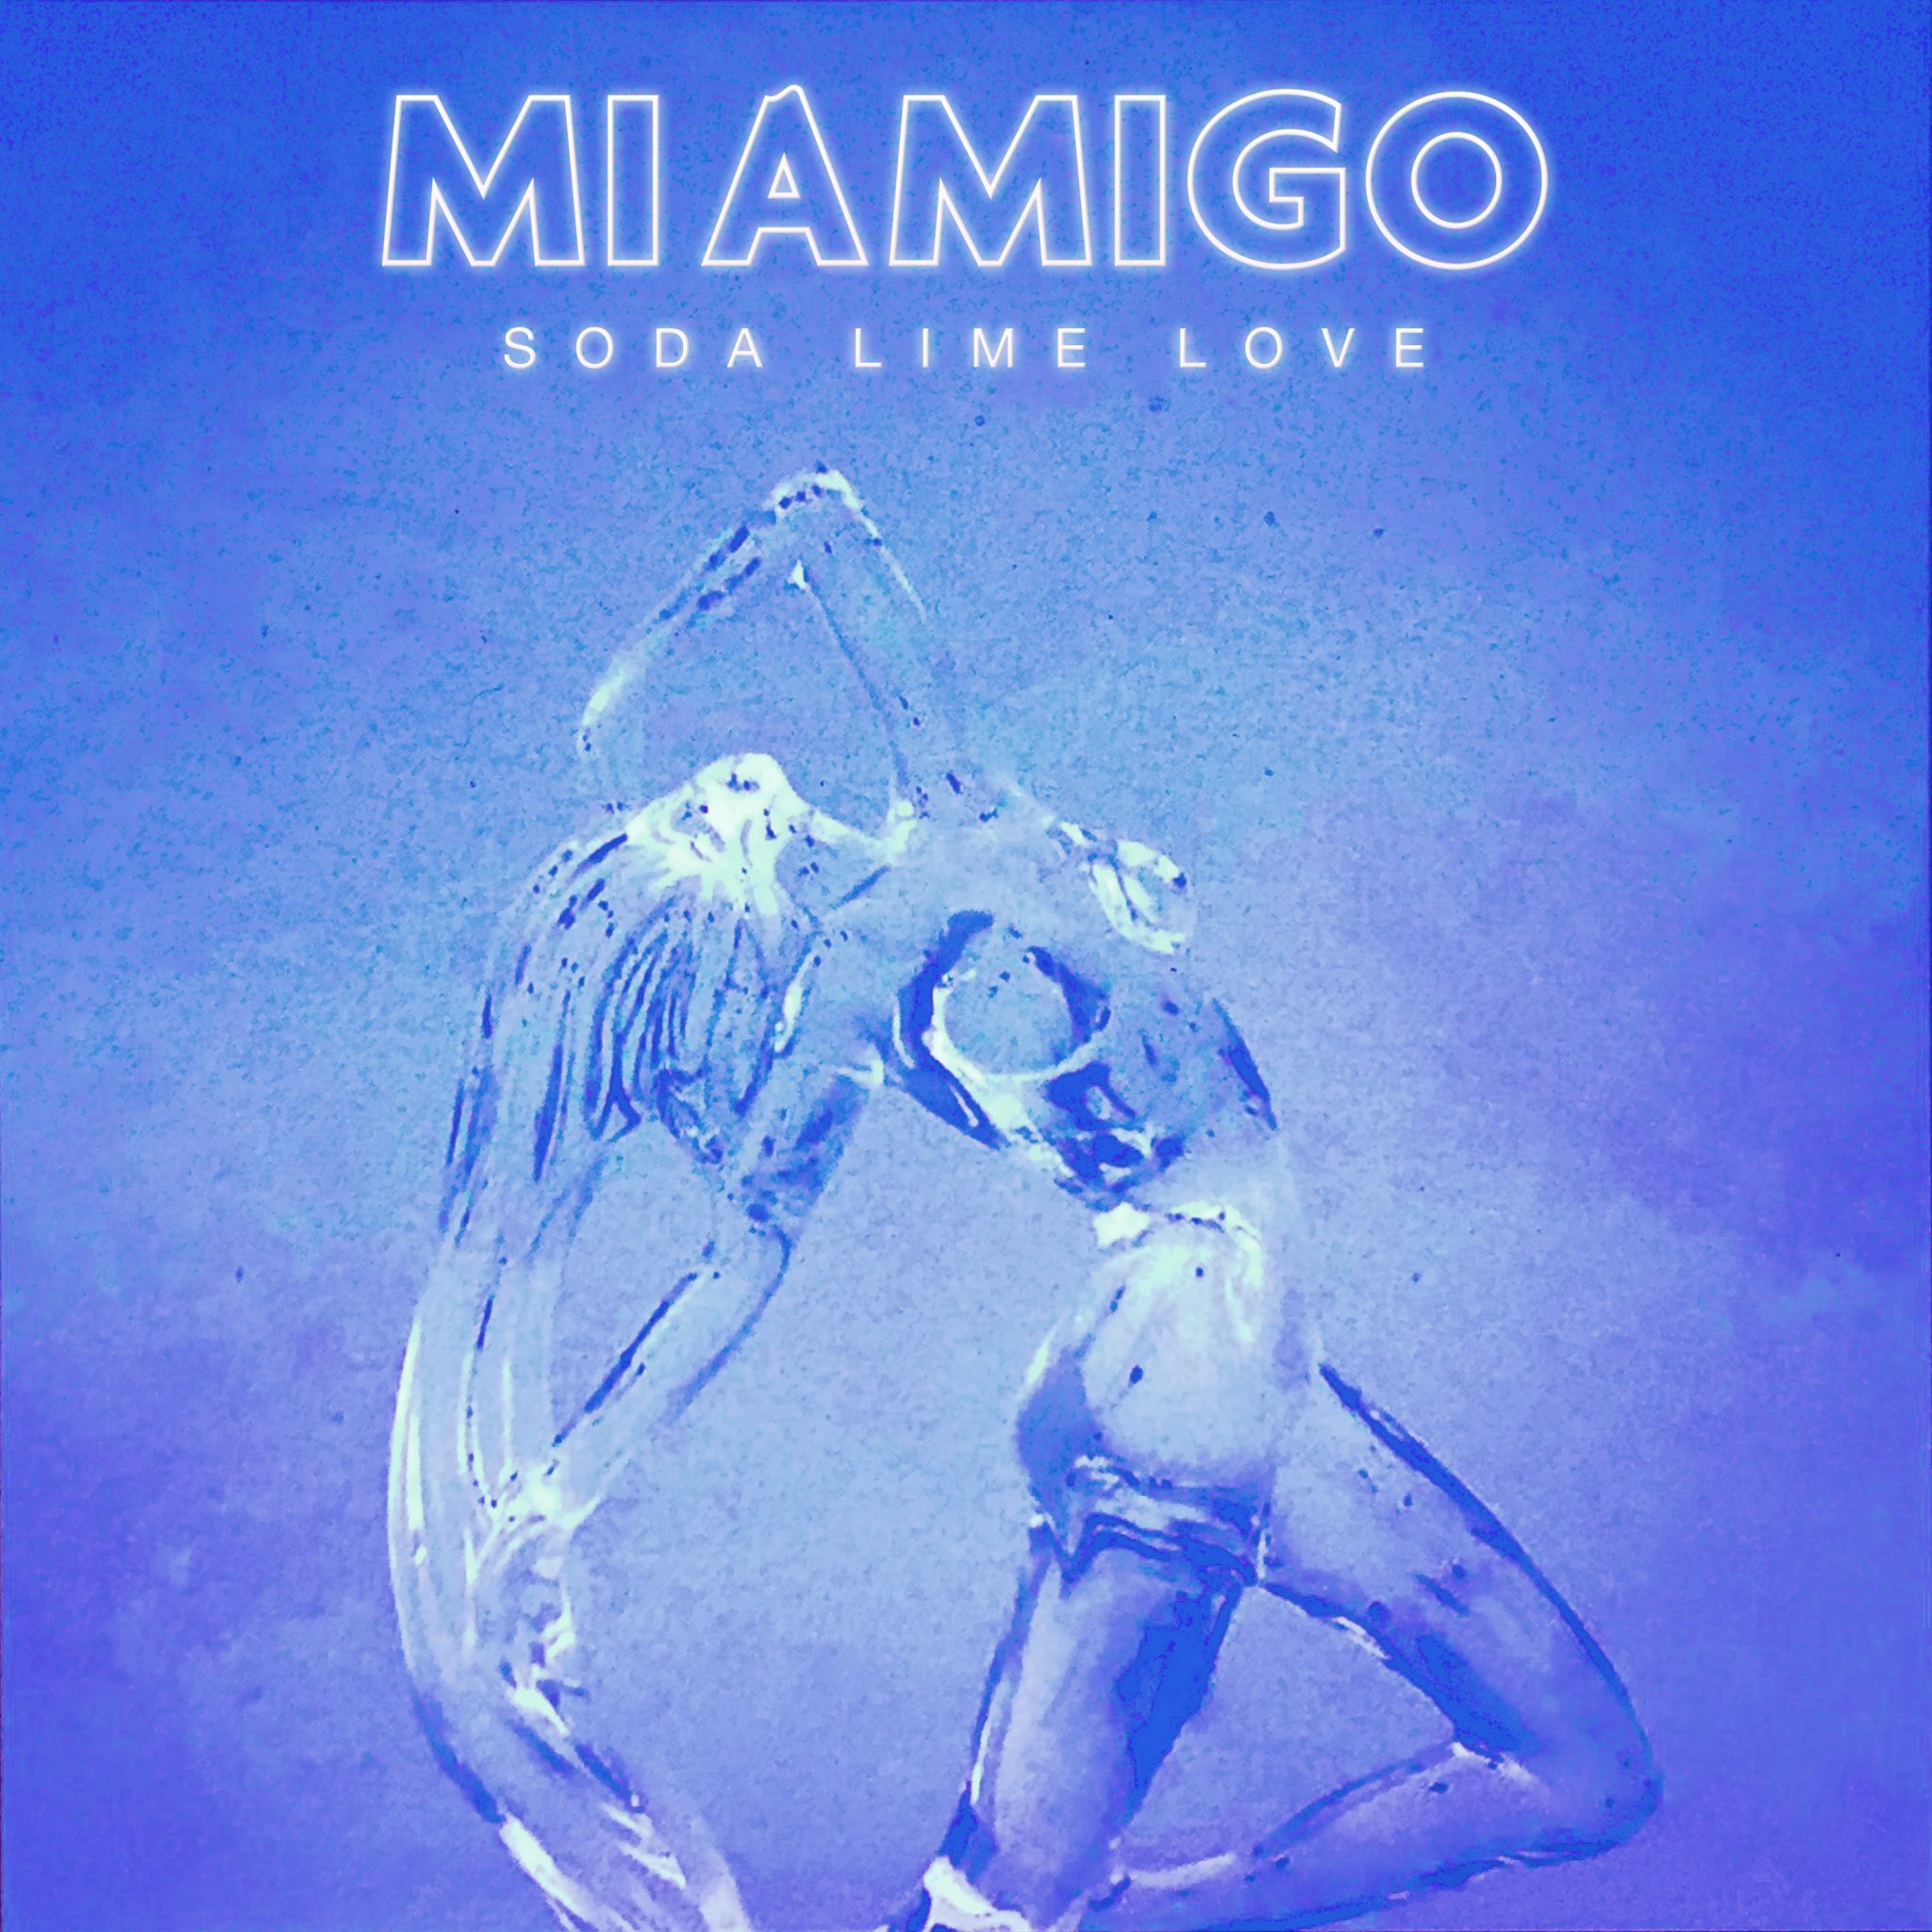 EP review- soda lime love ep-by-miamigo-indiepop-indie music-new music-indie pop-wolfinasuit-wolf in a suit